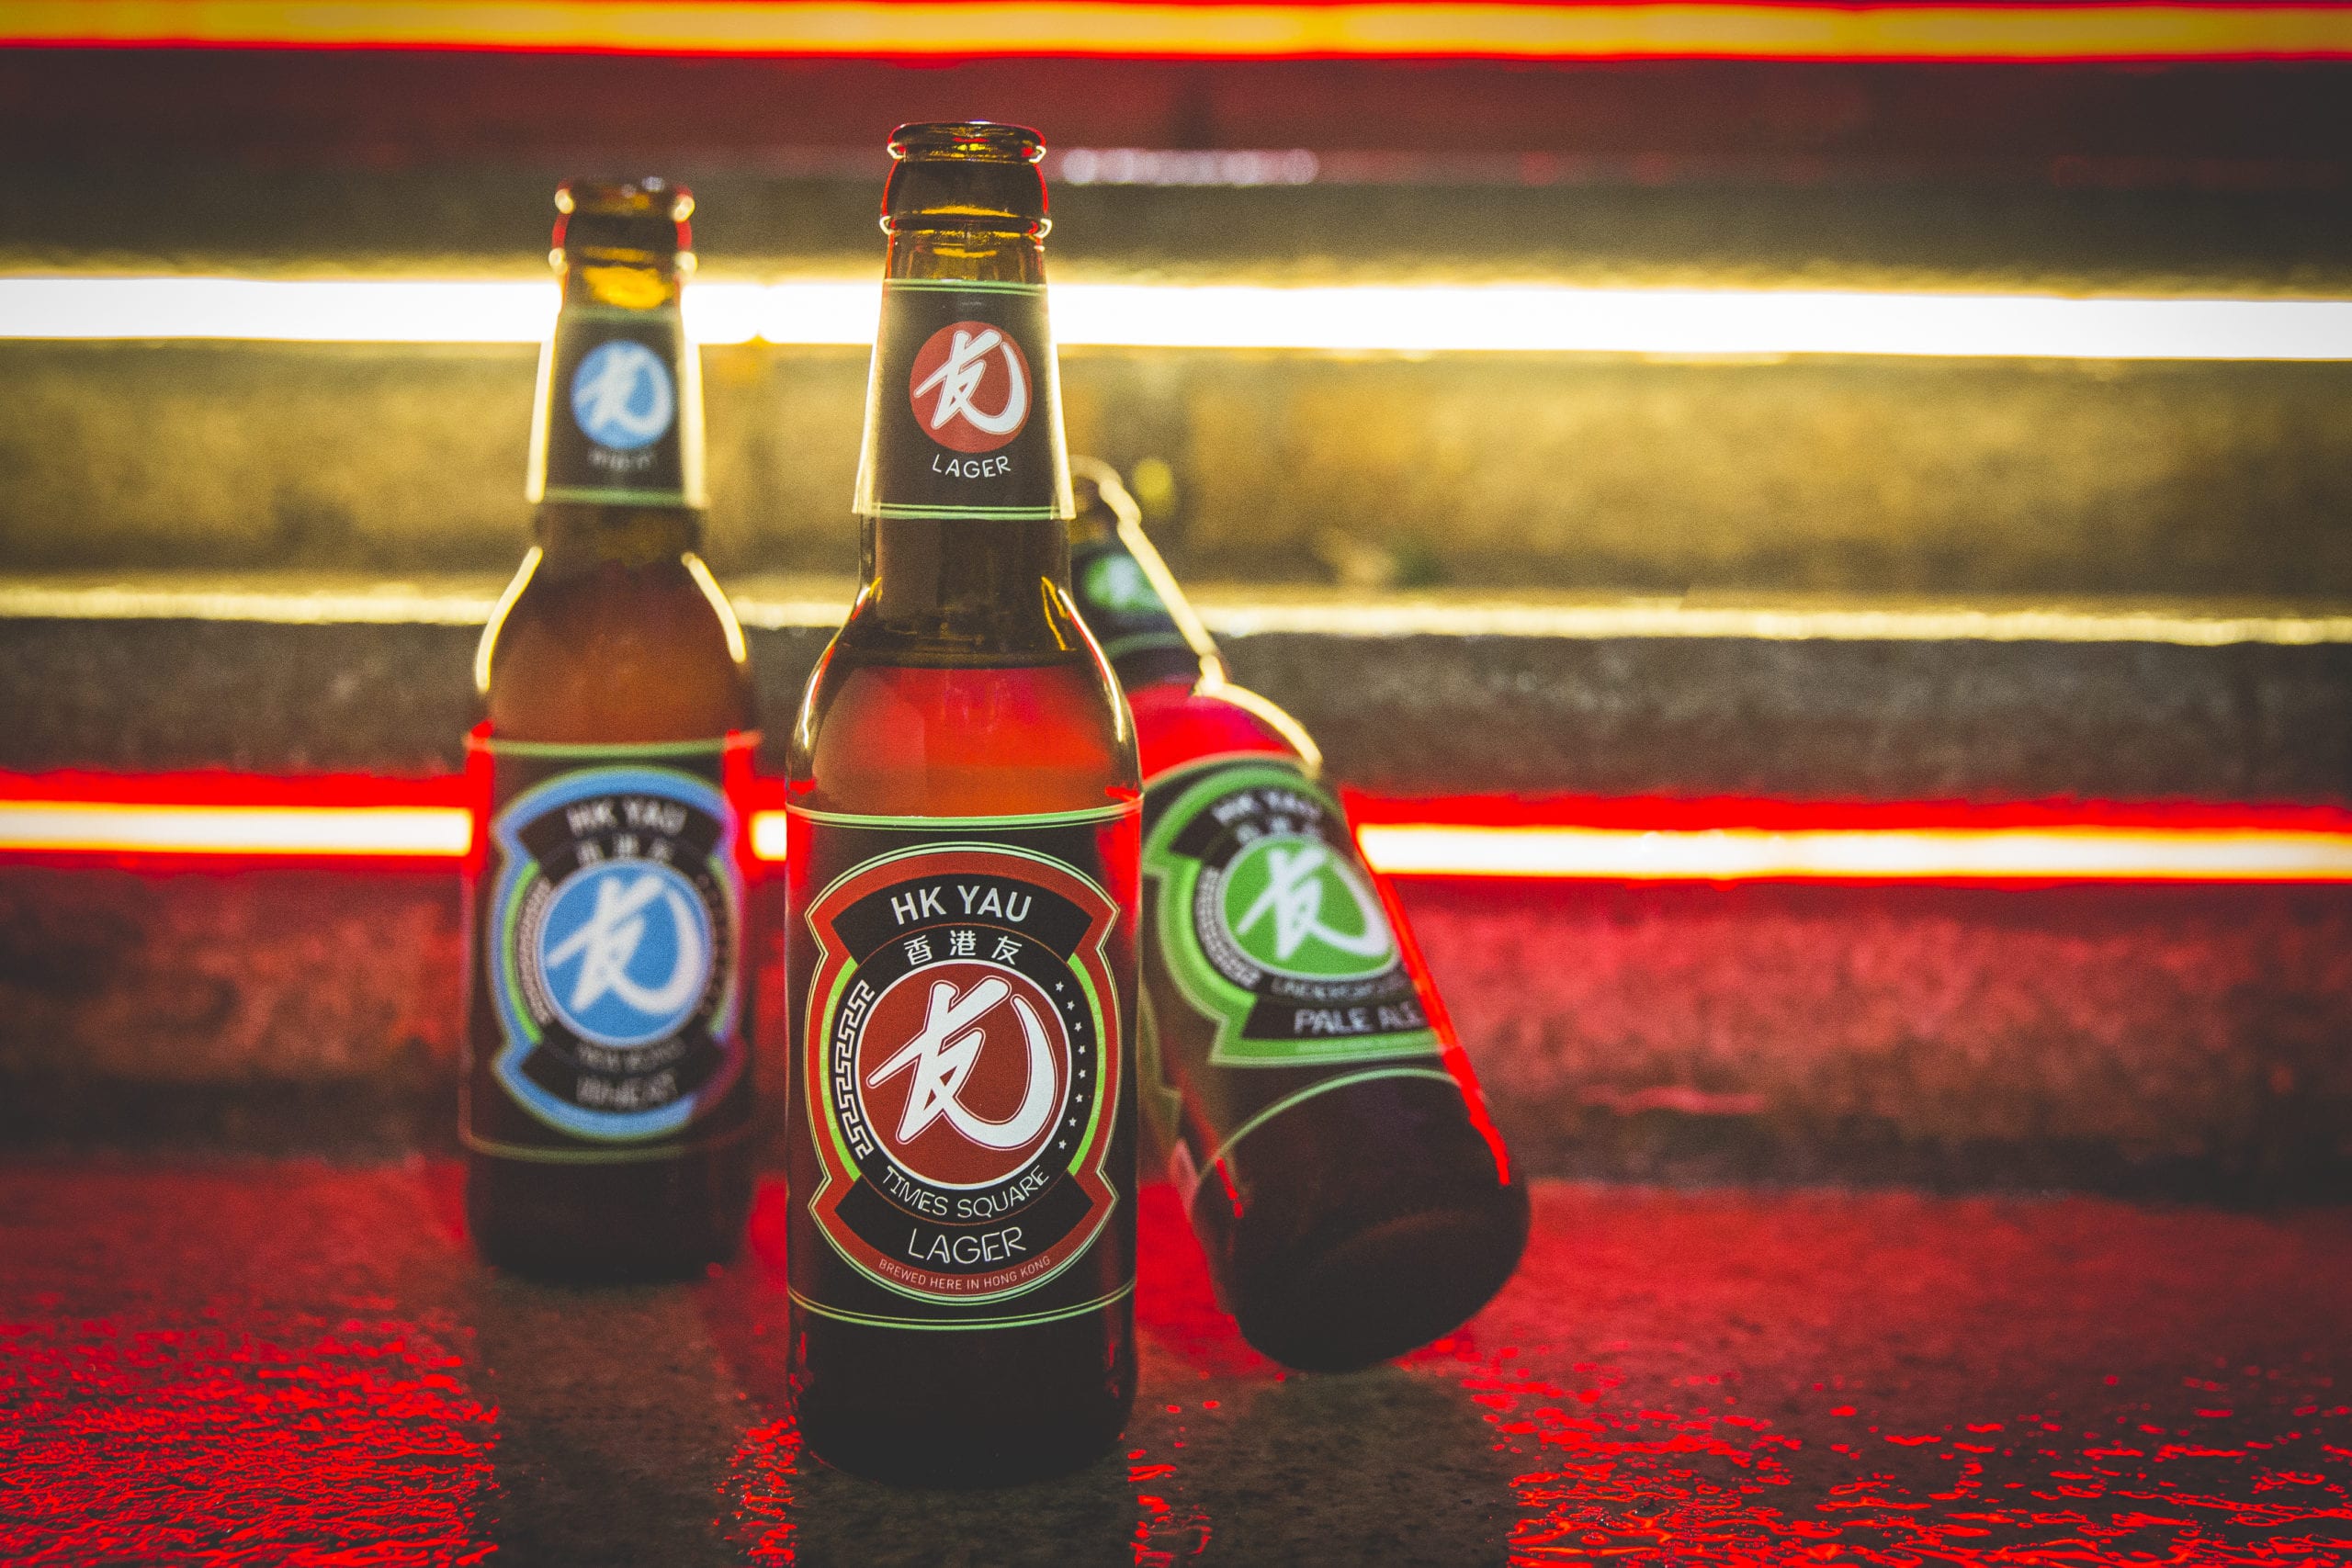 Three bottles of craft beer on the floor with neon lights on behind